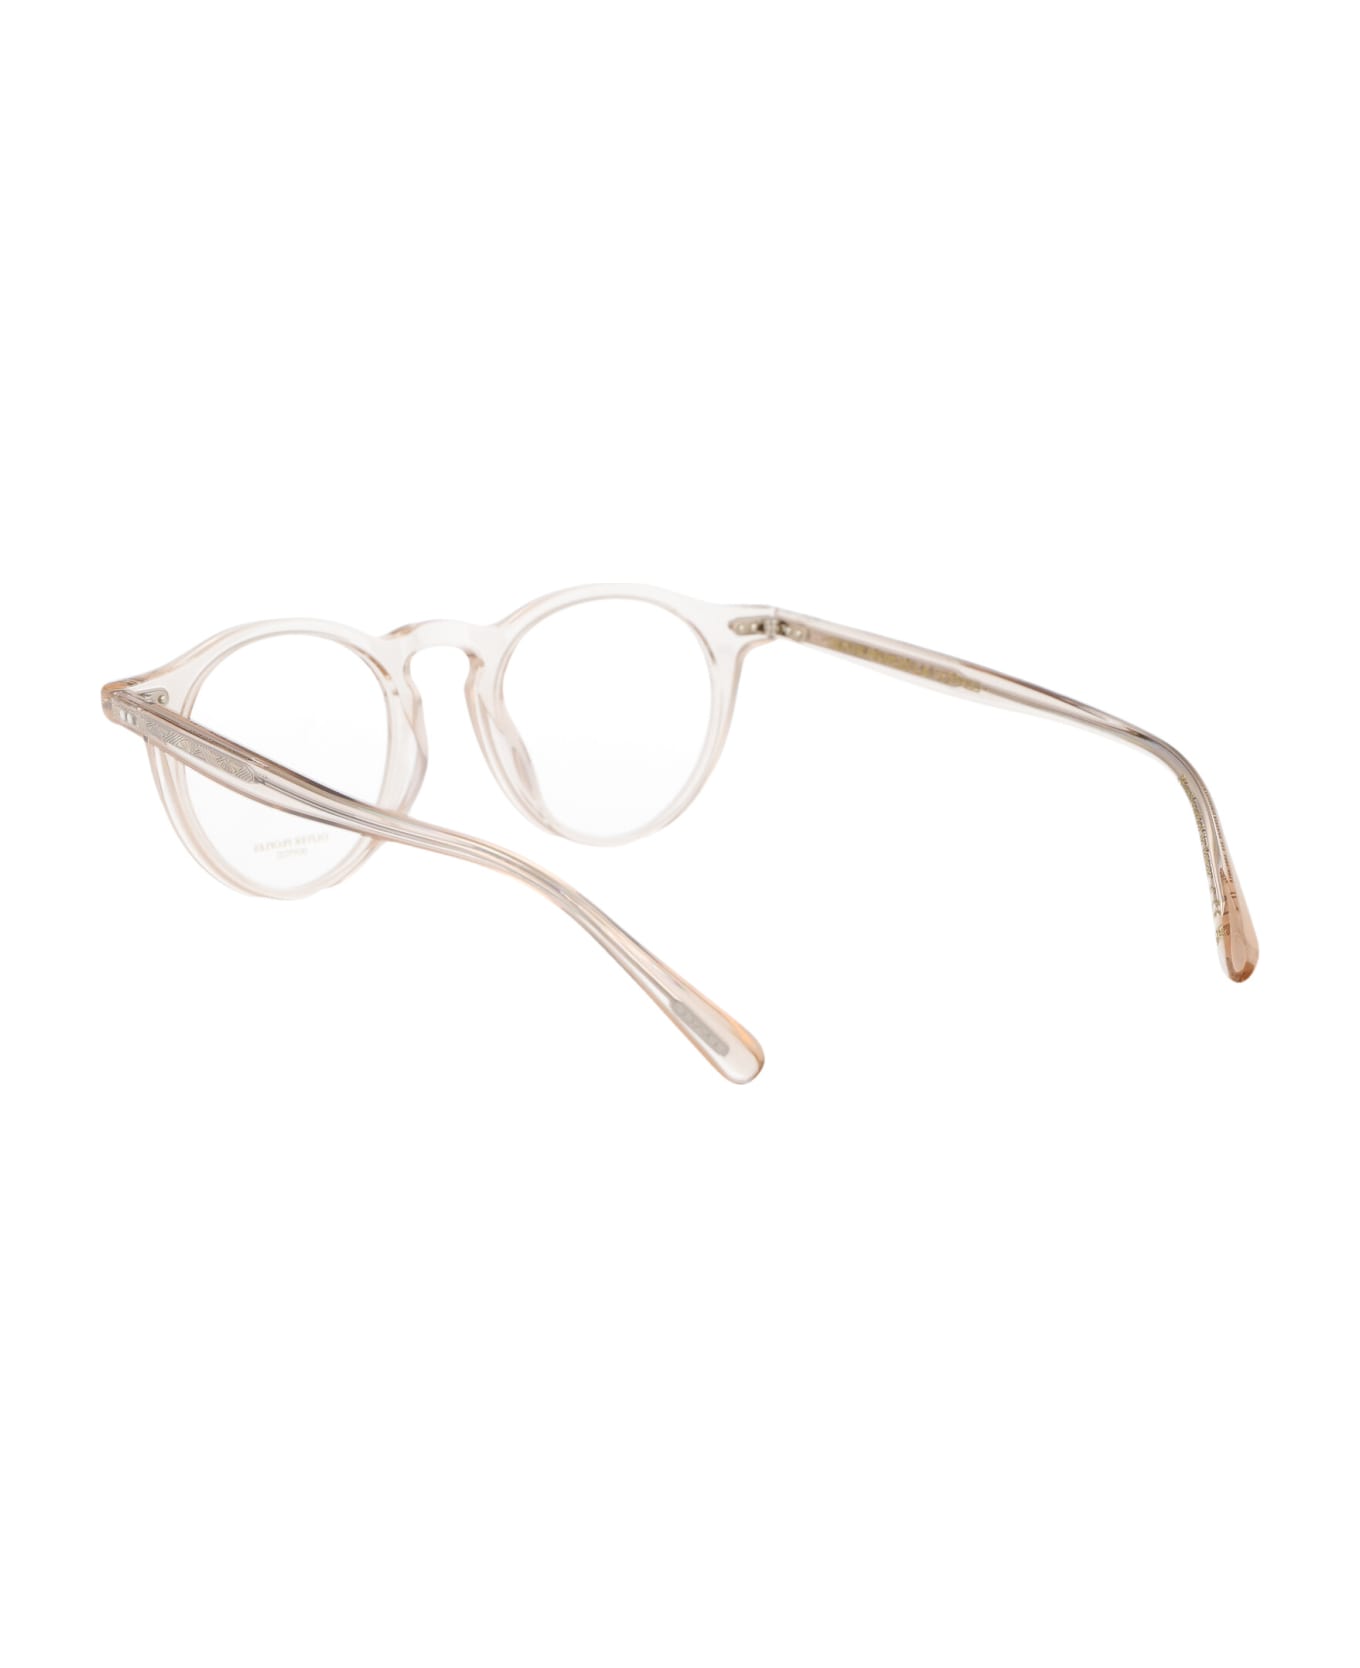 Oliver Peoples Op-13 Glasses - 1743 Cherry Blossom